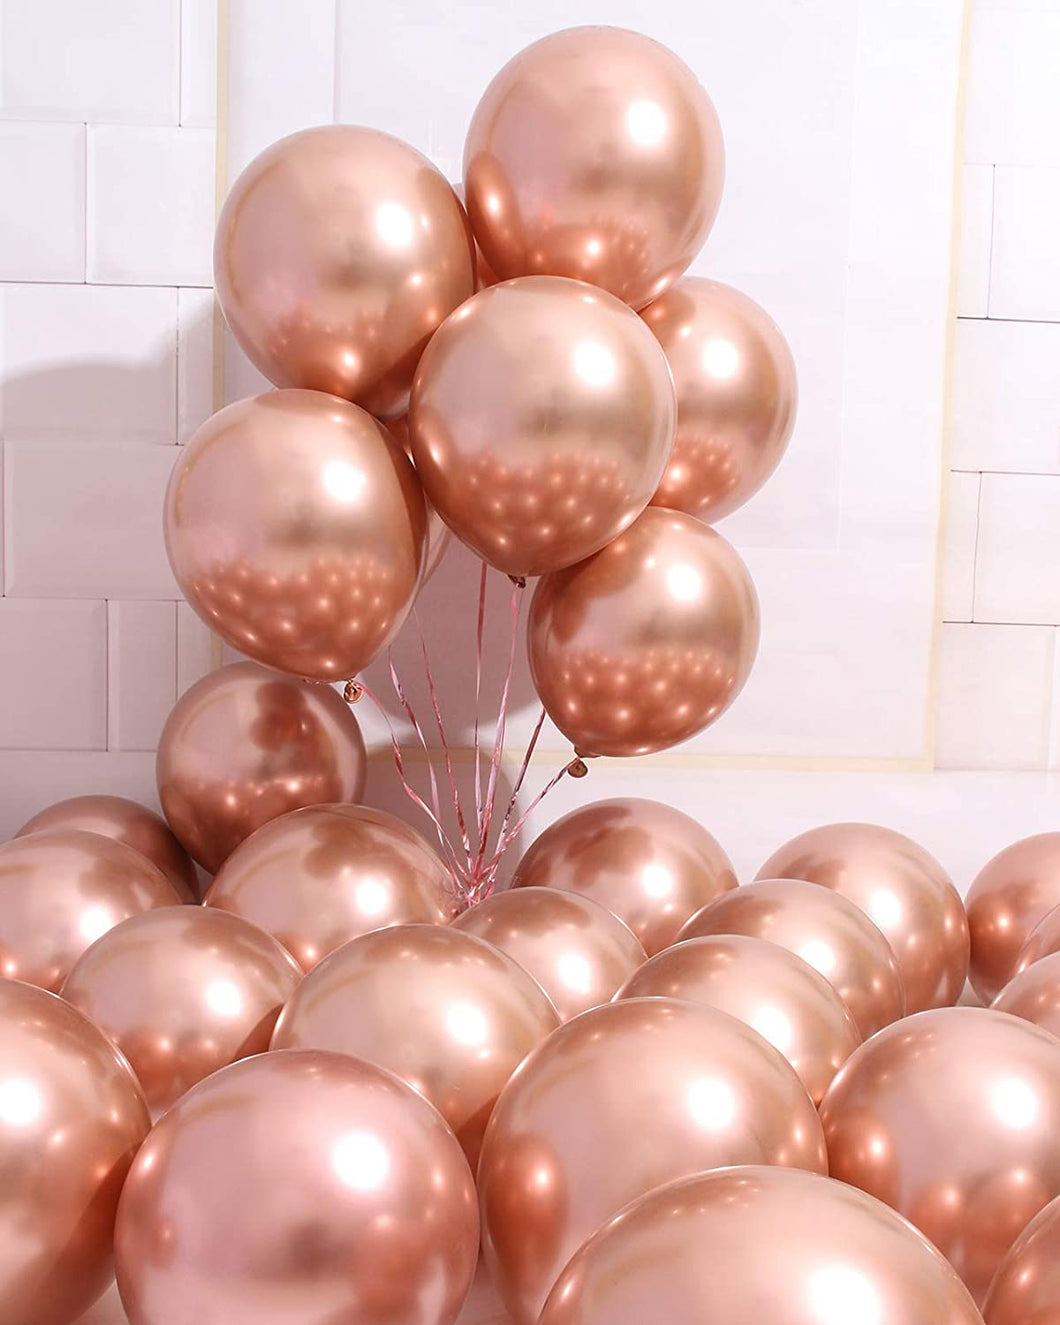 Premium Rose gold Chrome Balloons For Birthday Party And All Occasions. Express Delivery All Over India . Book Online At The Best Discounted Offer Price.  Rose gold Chrome Balloons Balloon Decoration For Birthday  ,    Rose gold Chrome Balloons Balloon Decoration , Rose gold Chrome Balloons s , Rose gold Chrome Balloons Balloon Decoration, Budget Friendly, Elite Party Decors, Surprise Party Decors, Indoor And Outdoor Party Decor